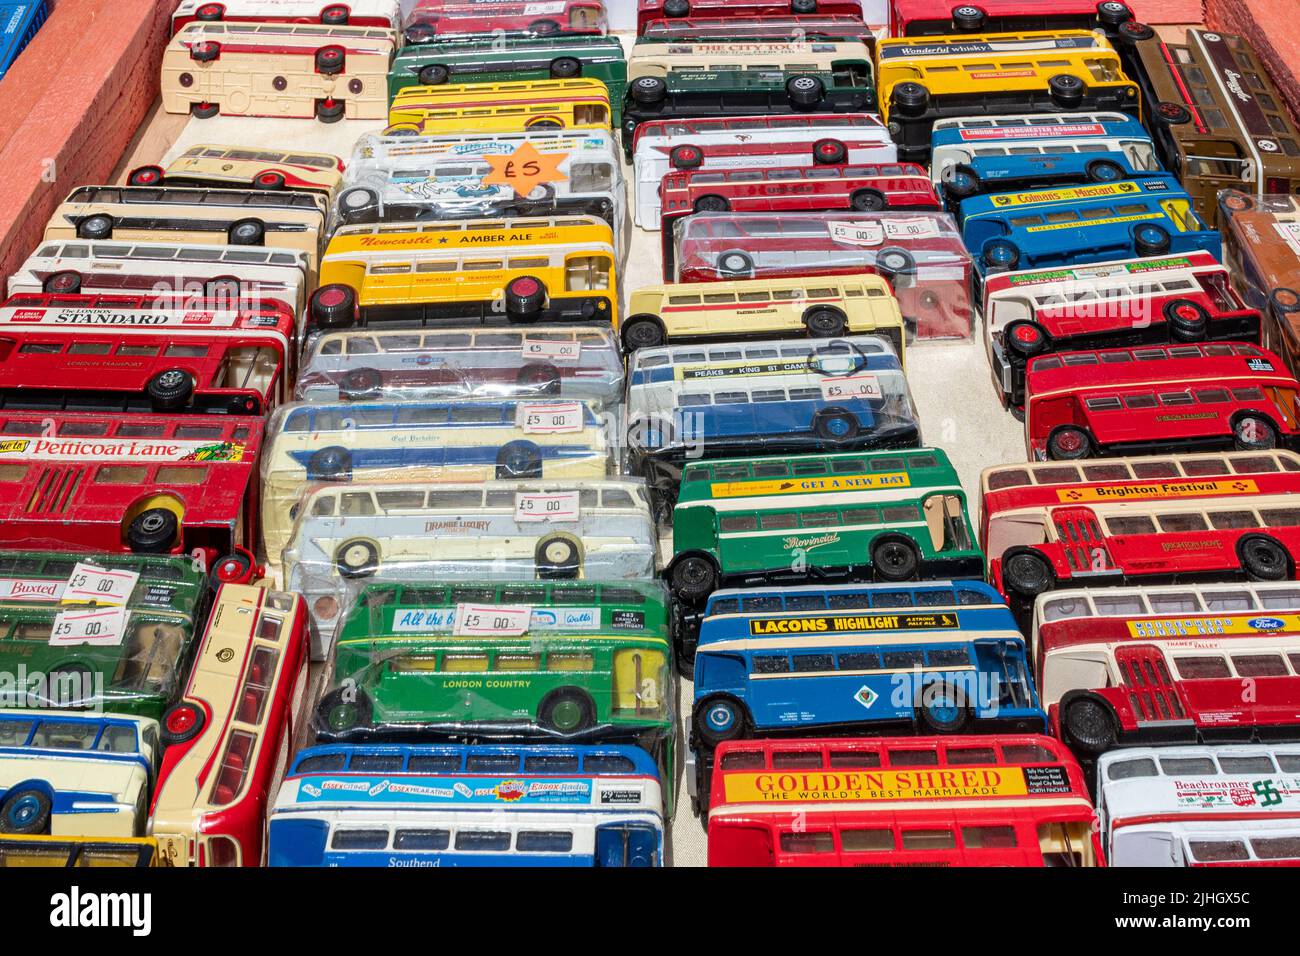 Toy buses, collectible models, on sale on a stall at a transport event, England, UK Stock Photo